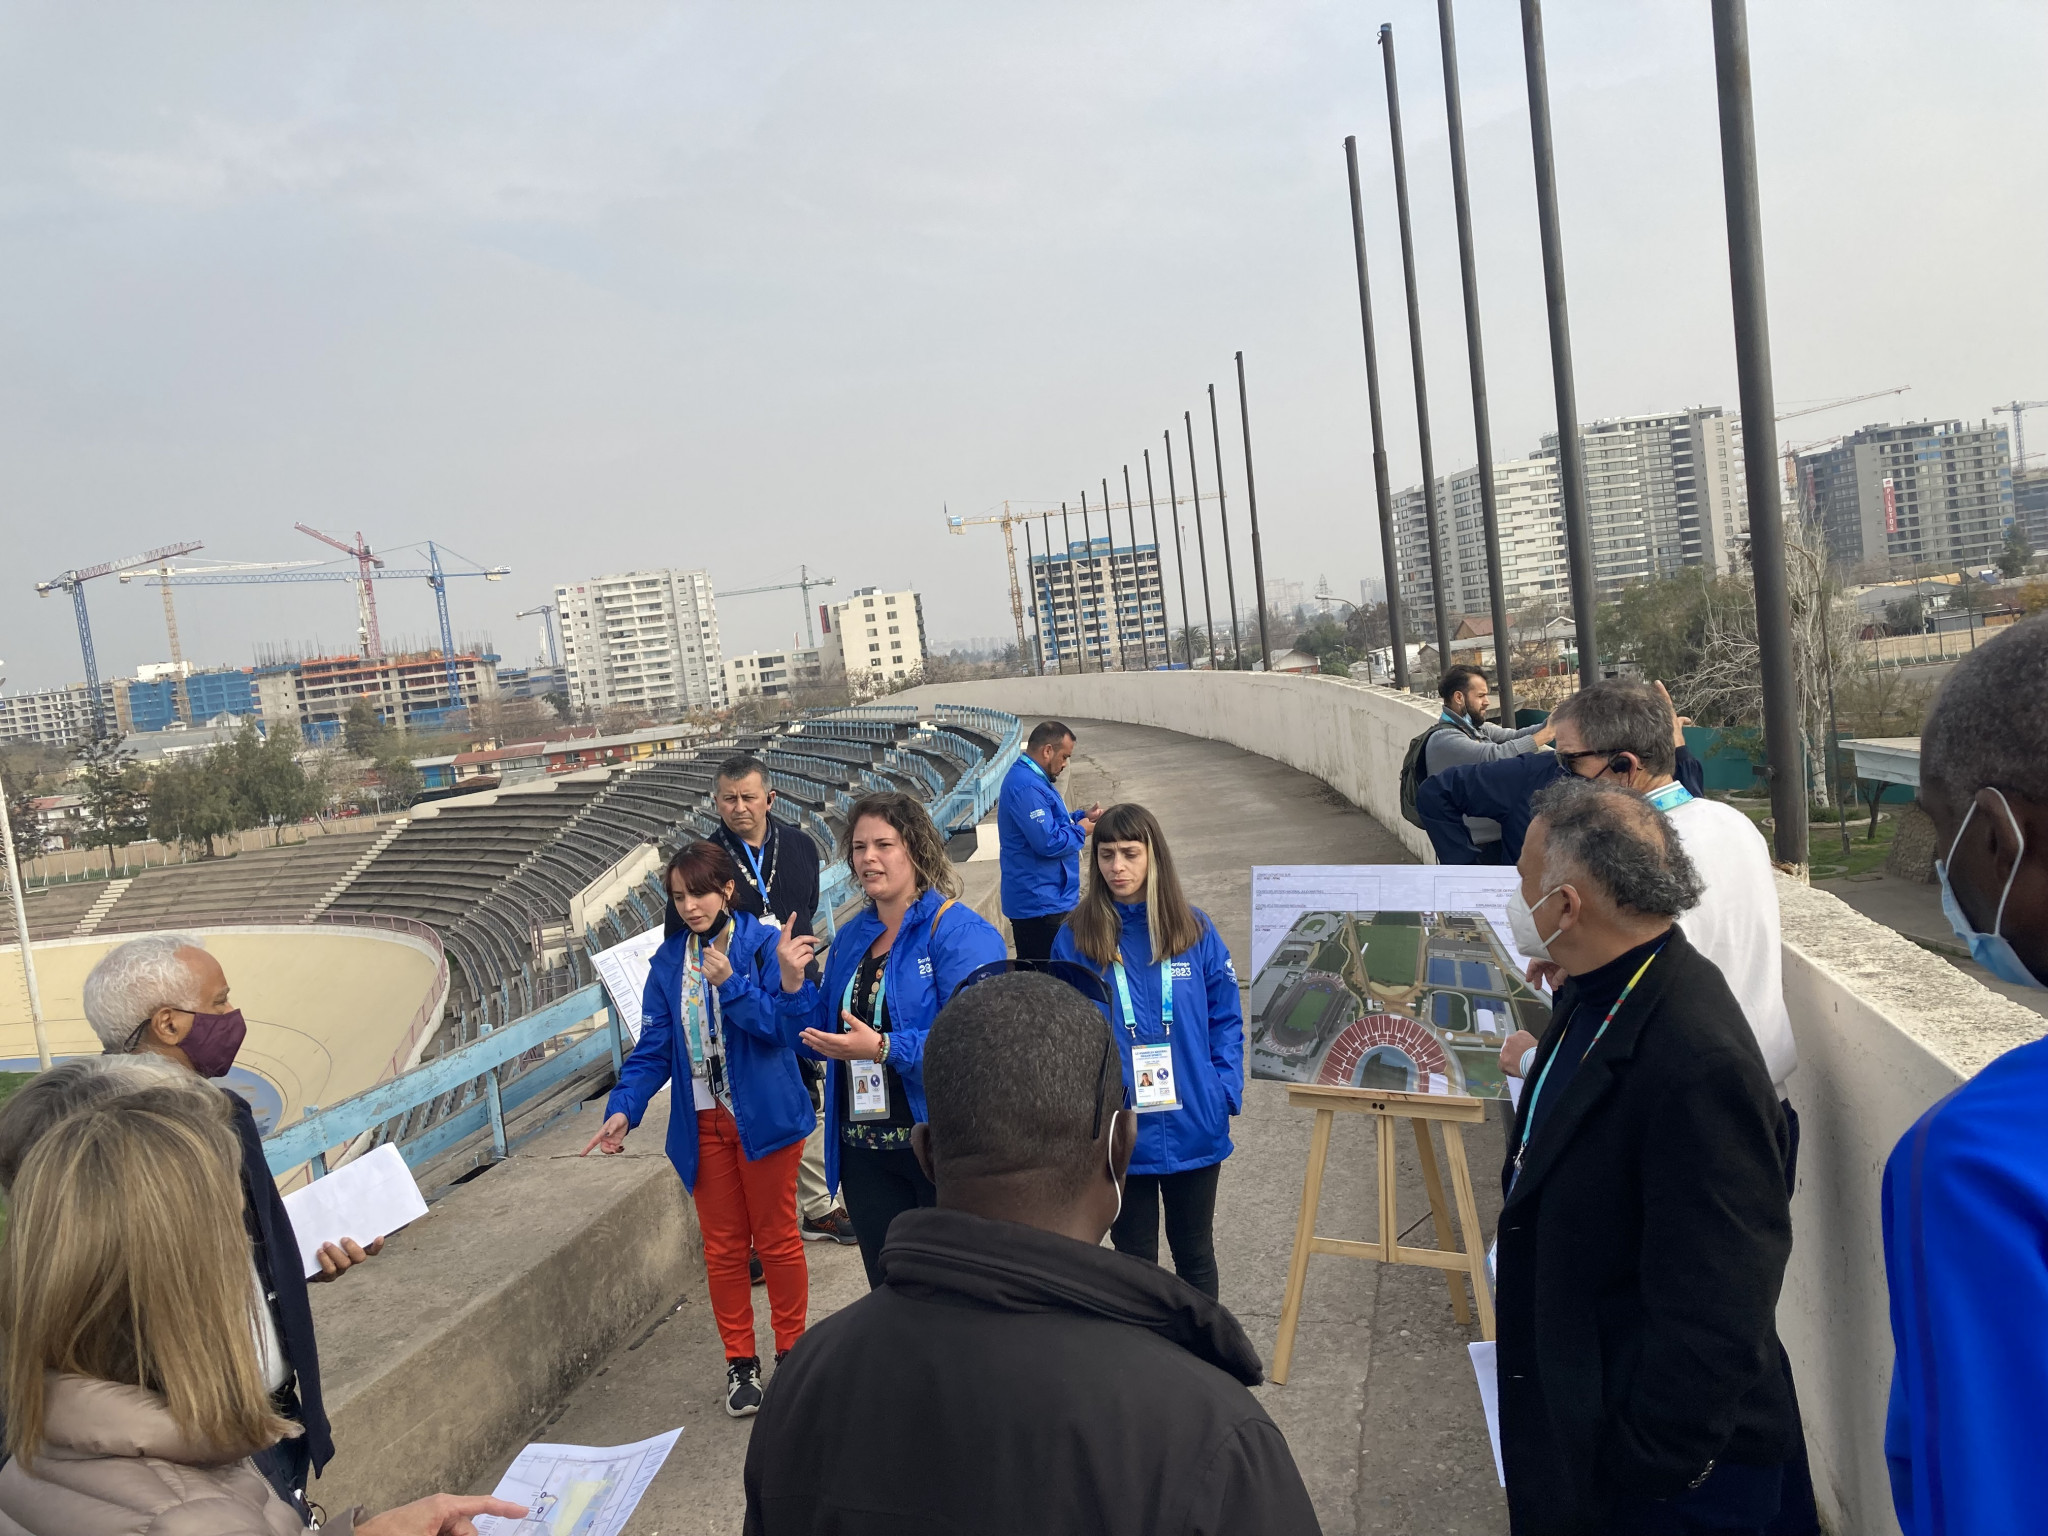 Santiago 2023 staff also led a tour group around one of the main cluster sites in the Chilean capital ©ITG